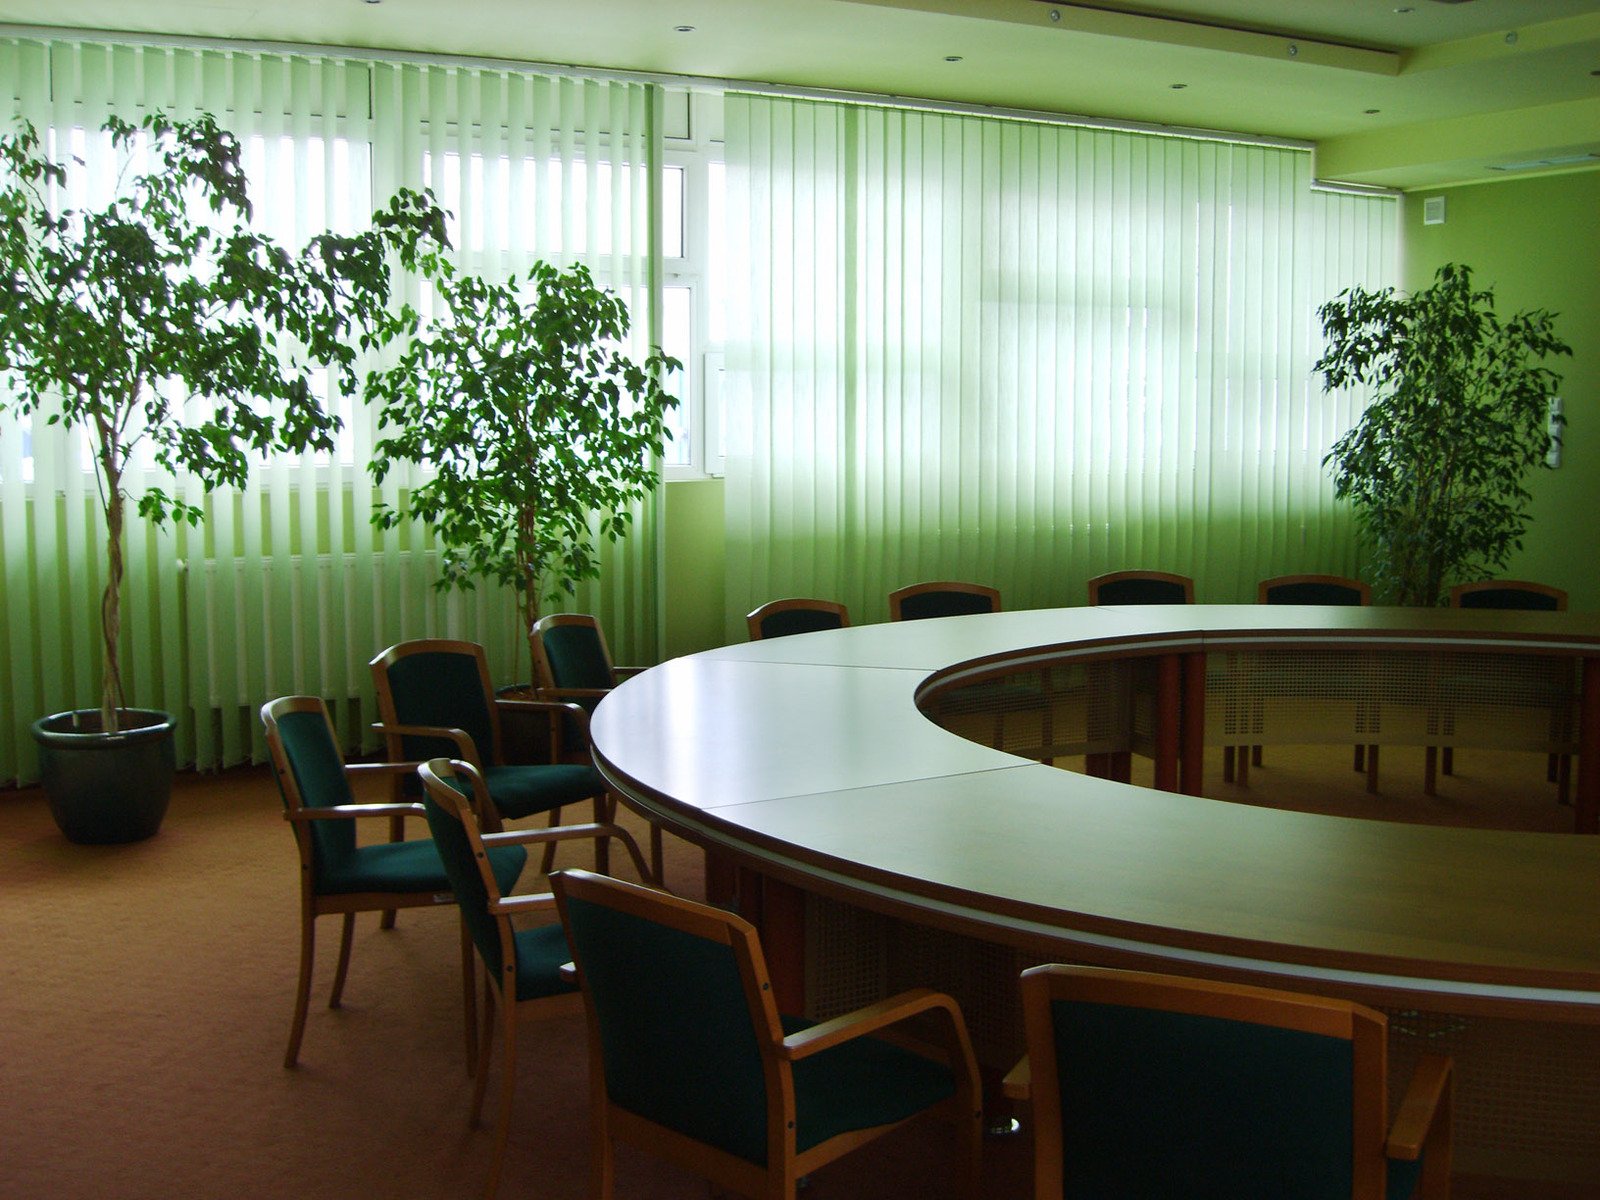 several wooden chairs are around the conference table